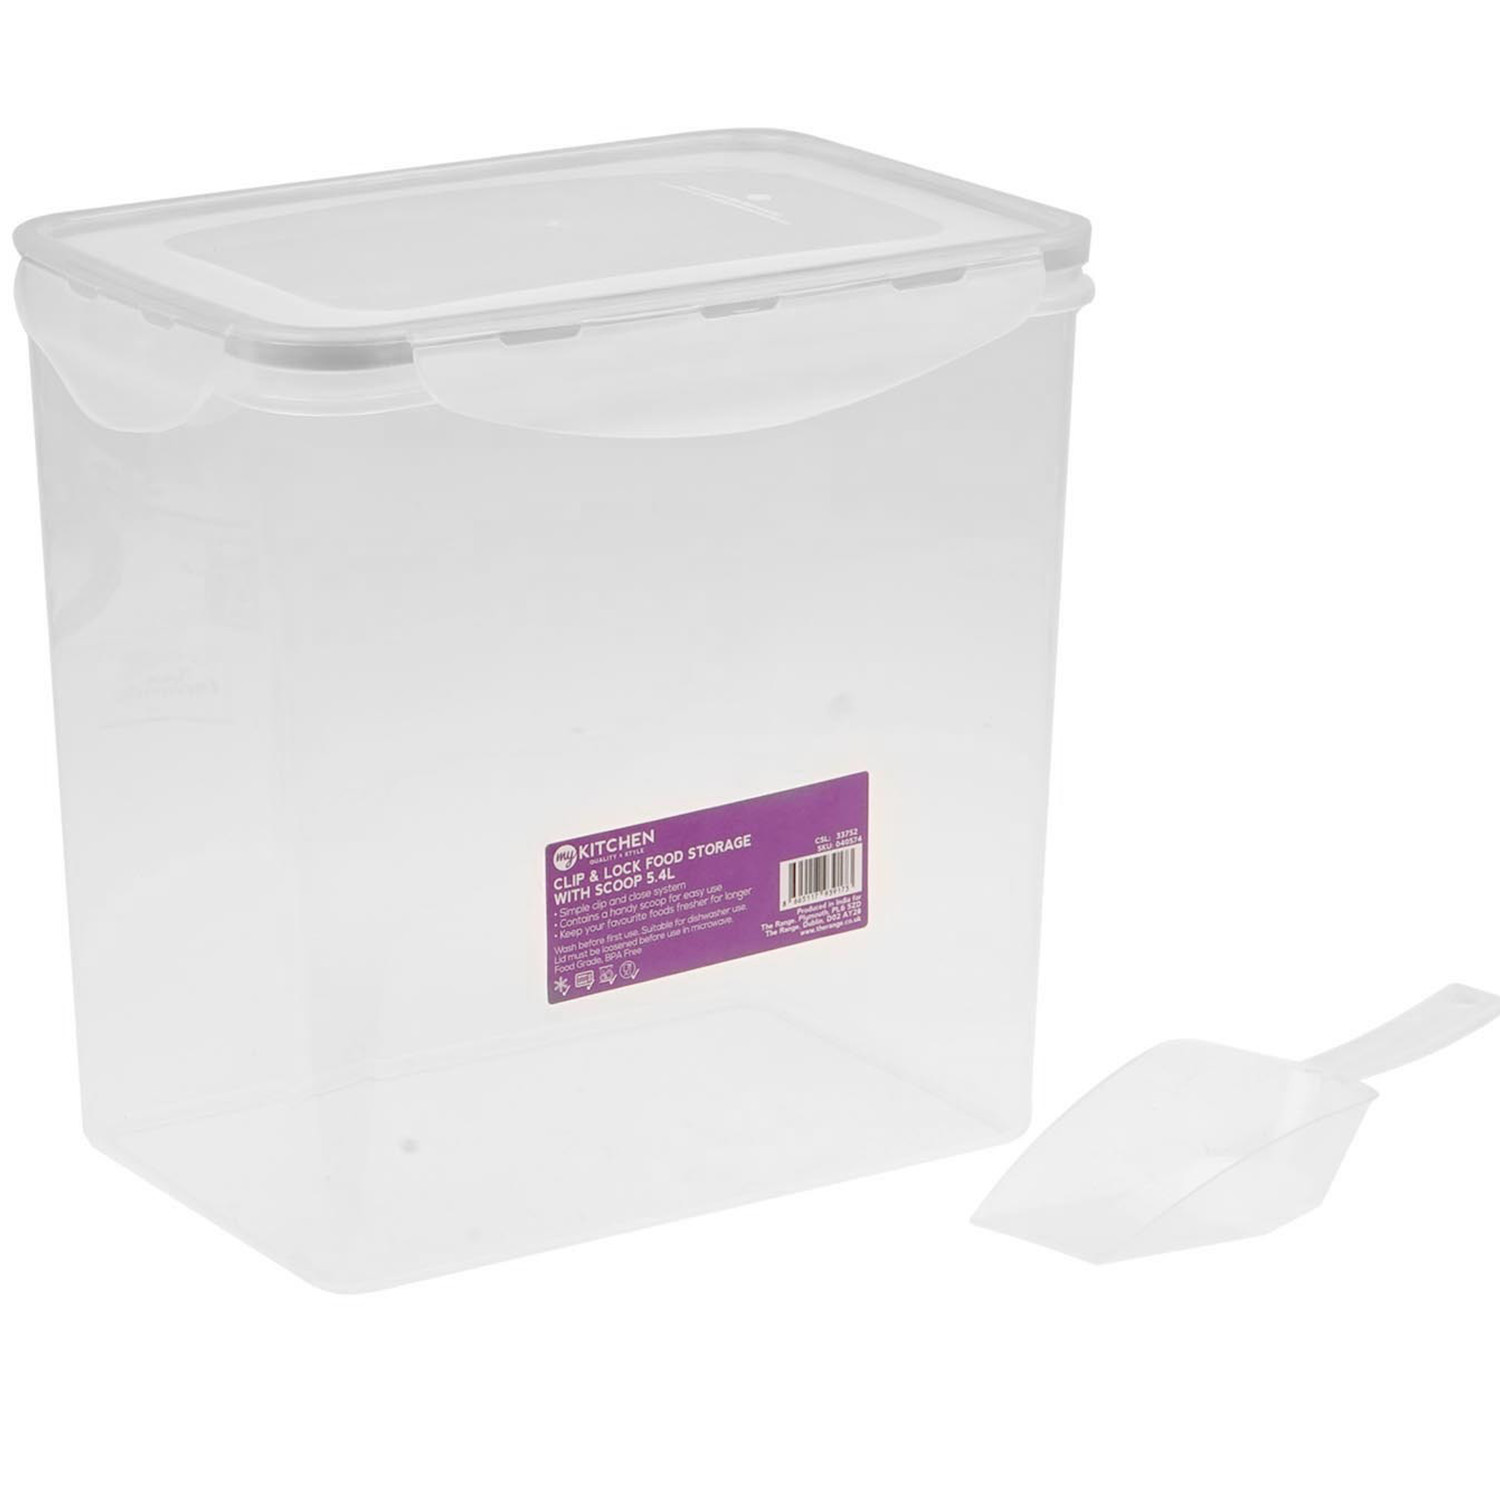 My Kitchen Clip and Lock Food Storage Box with Scoop 5.4L Image 1